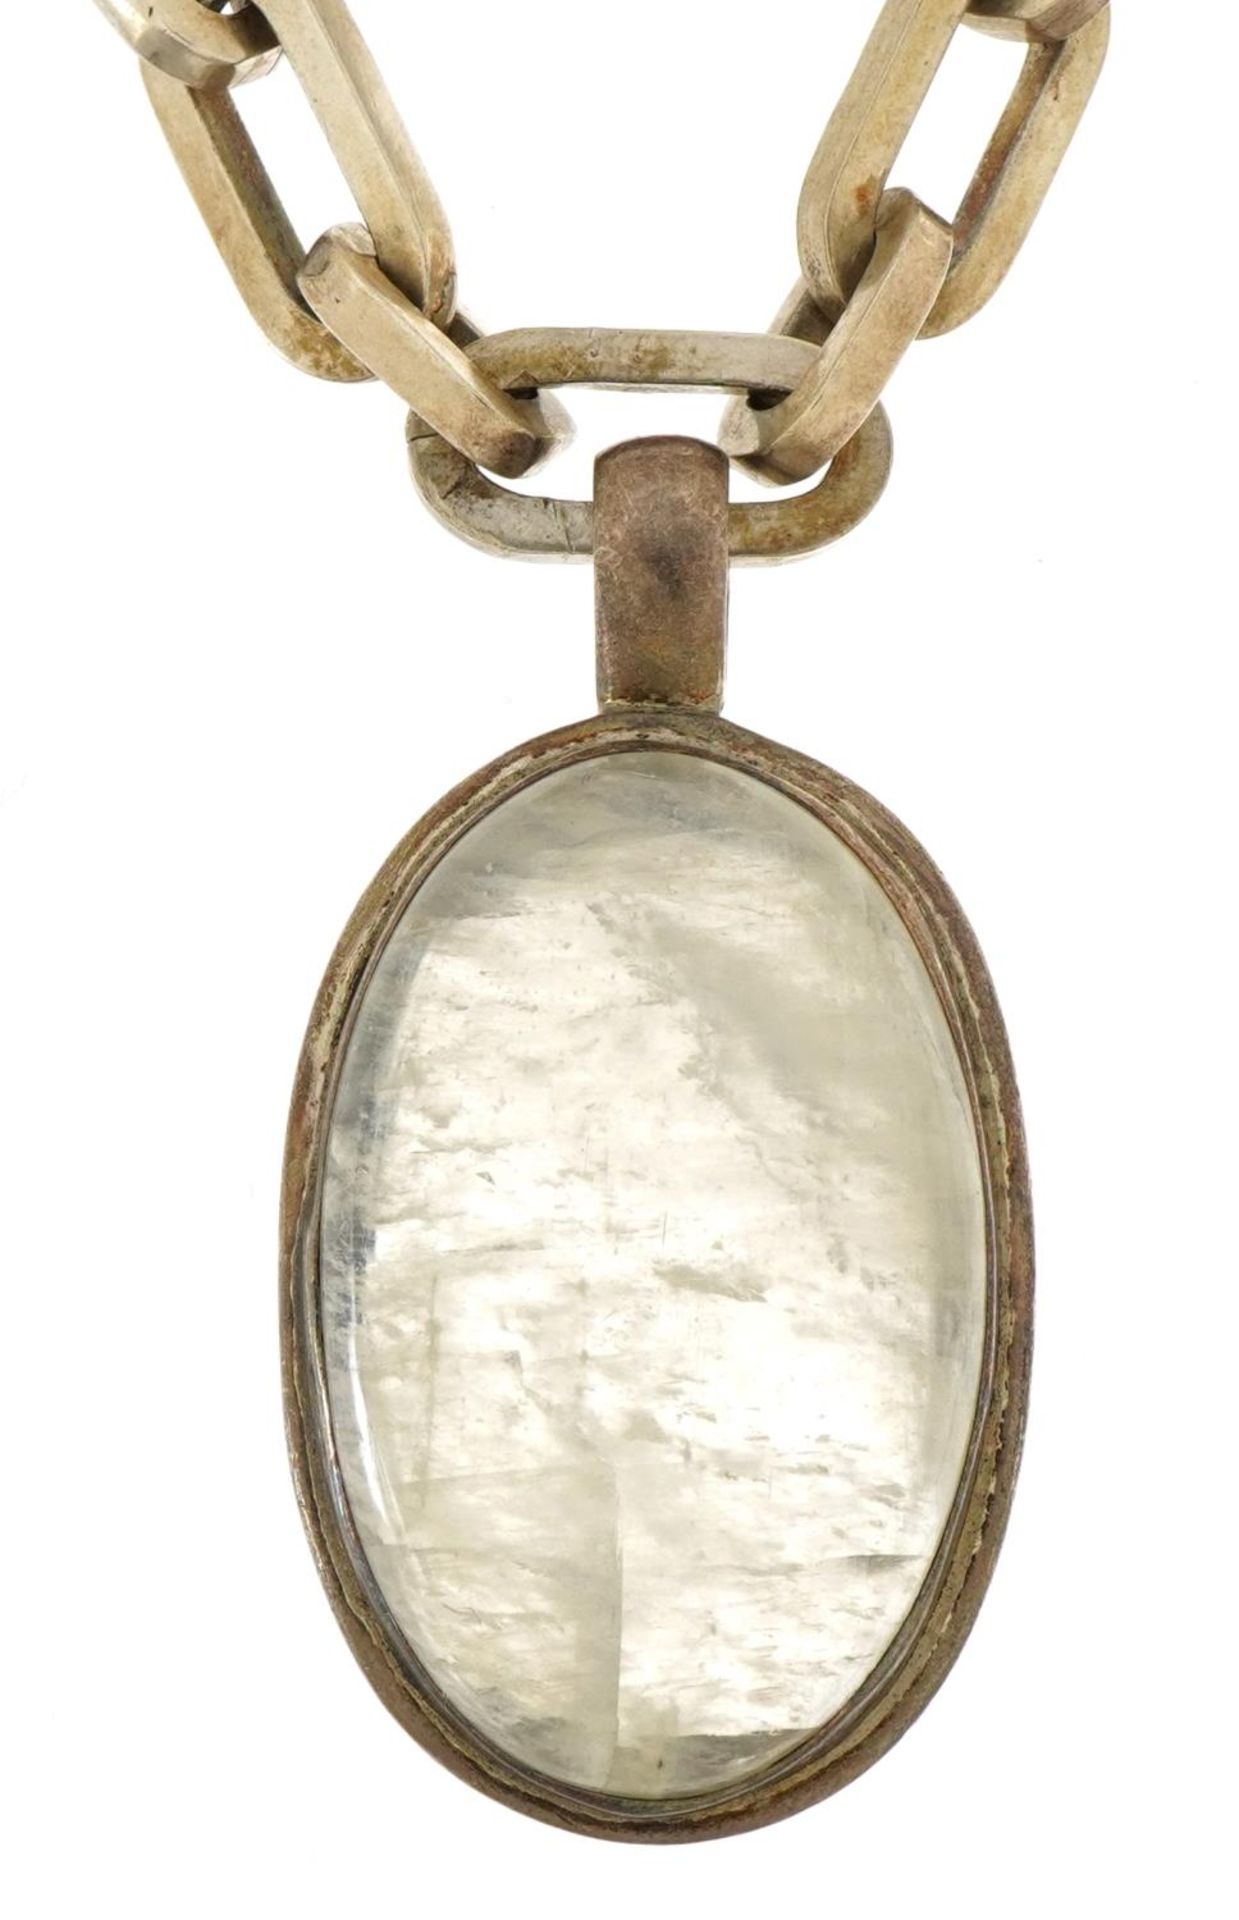 Heavy white metal necklace with large rock crystal pendant, 6cm high and 52cm in length, 158.0g